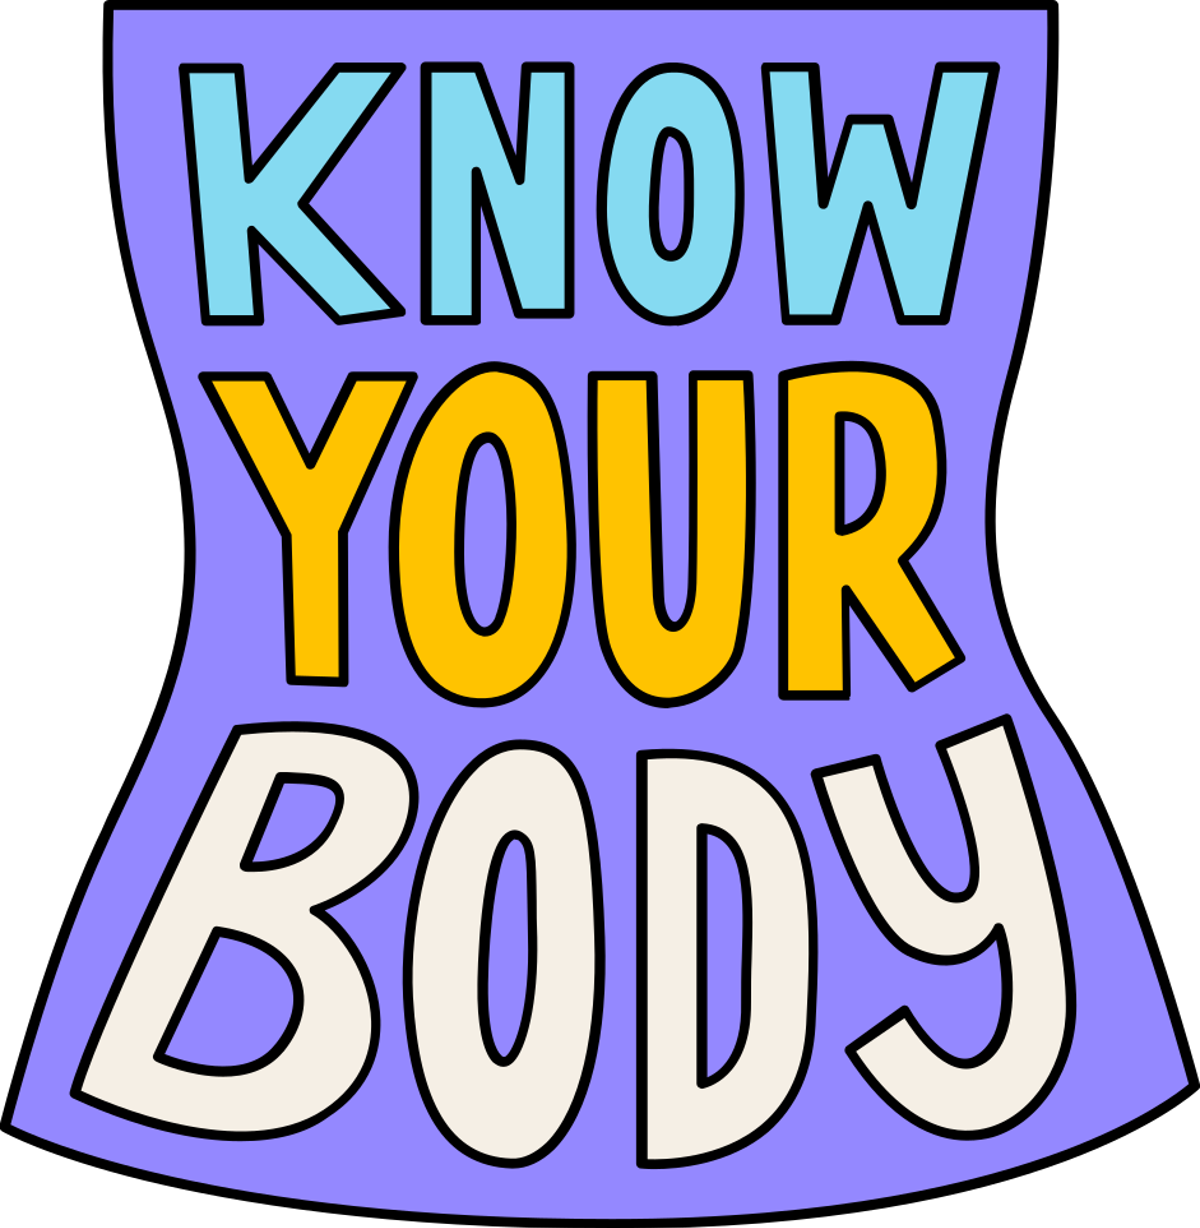 Know Your Body